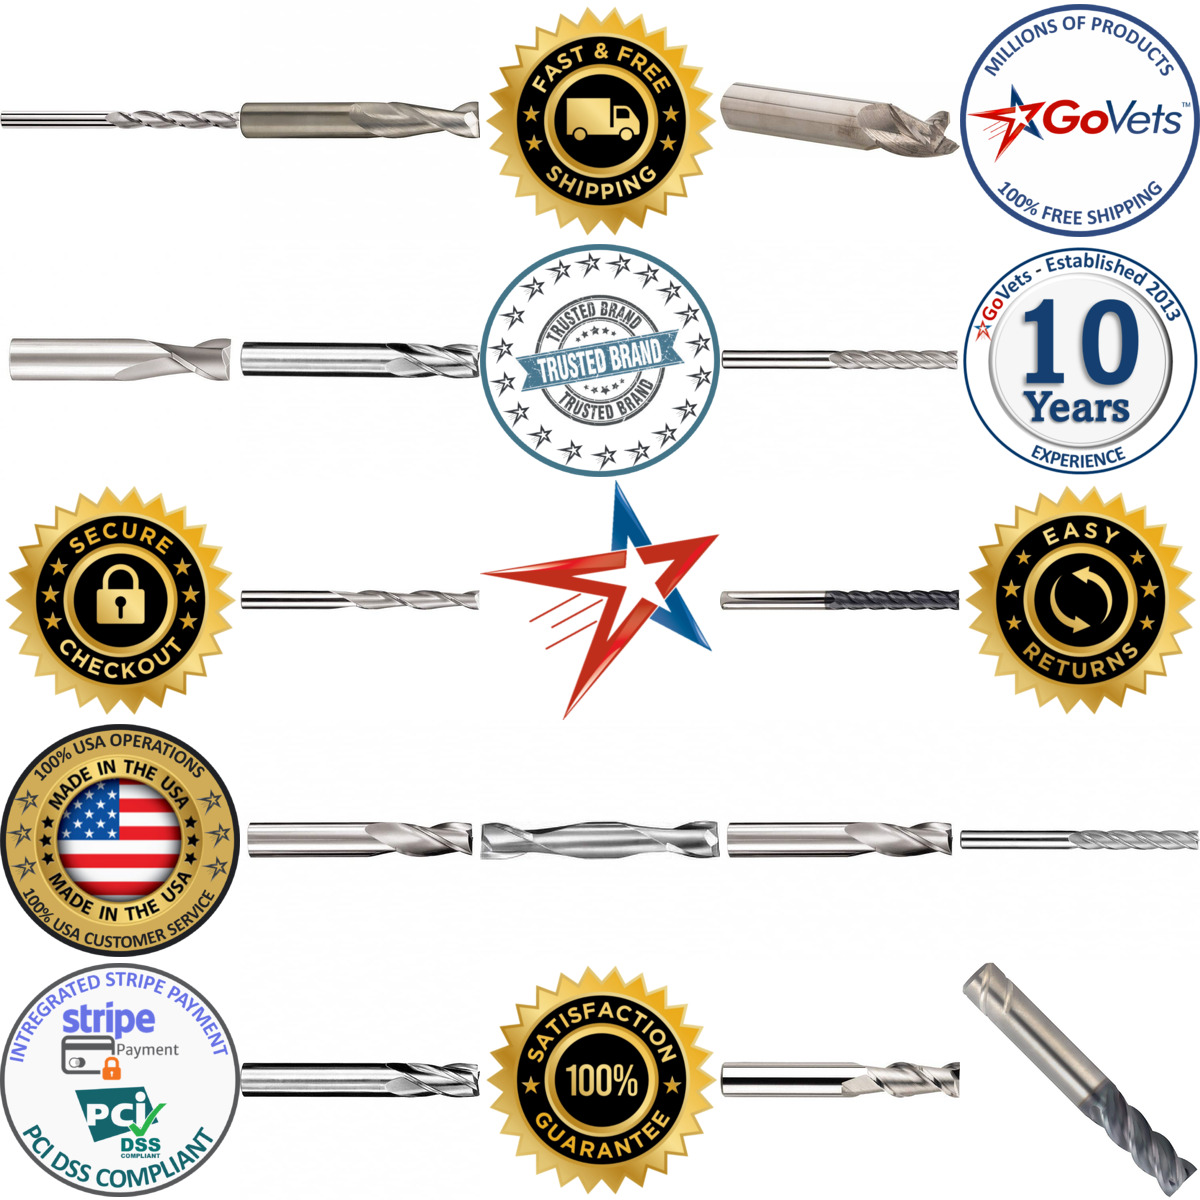 A selection of Jobber Length Drill Bits products on GoVets